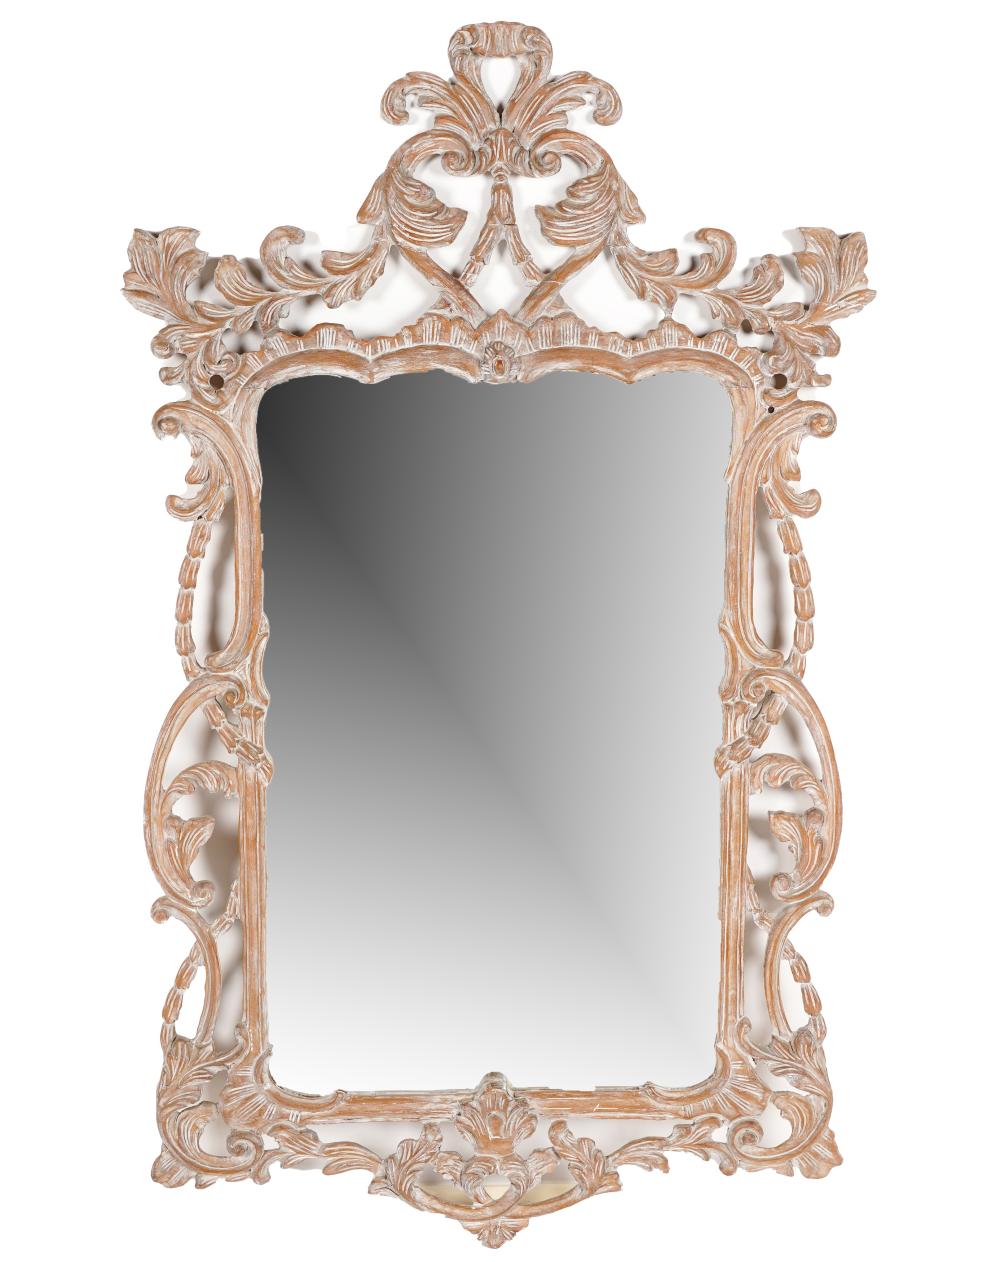 CARVED BLEACHED WOOD WALL MIRRORwith